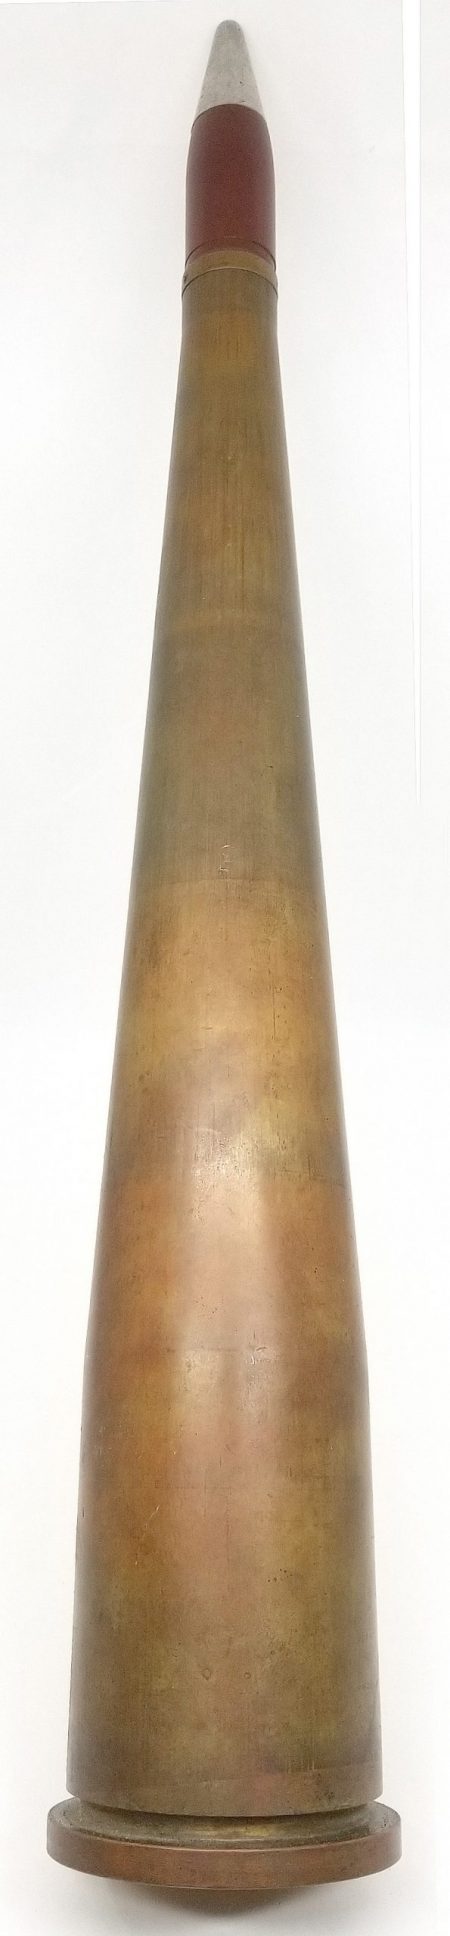 Lot 47 - Experimental 40mm/20mm experimental very high velocity cartridge. Dummy, with struck small copper percussion primer. 40mm brass case, headstamp; “40 MM MK2 TM 8 1944 GMS LOT 6,” screw-in primer. Long case (12.25”/31cm) tapered down to 20mm. Bullet rotating band marked; “*H/M A 20-MM MK13-OD 5-1*.” Projectile is purple/red with plain aluminum fuze. OAL 15.15”/38.4cm. Ex-Woodin collection. $500-750